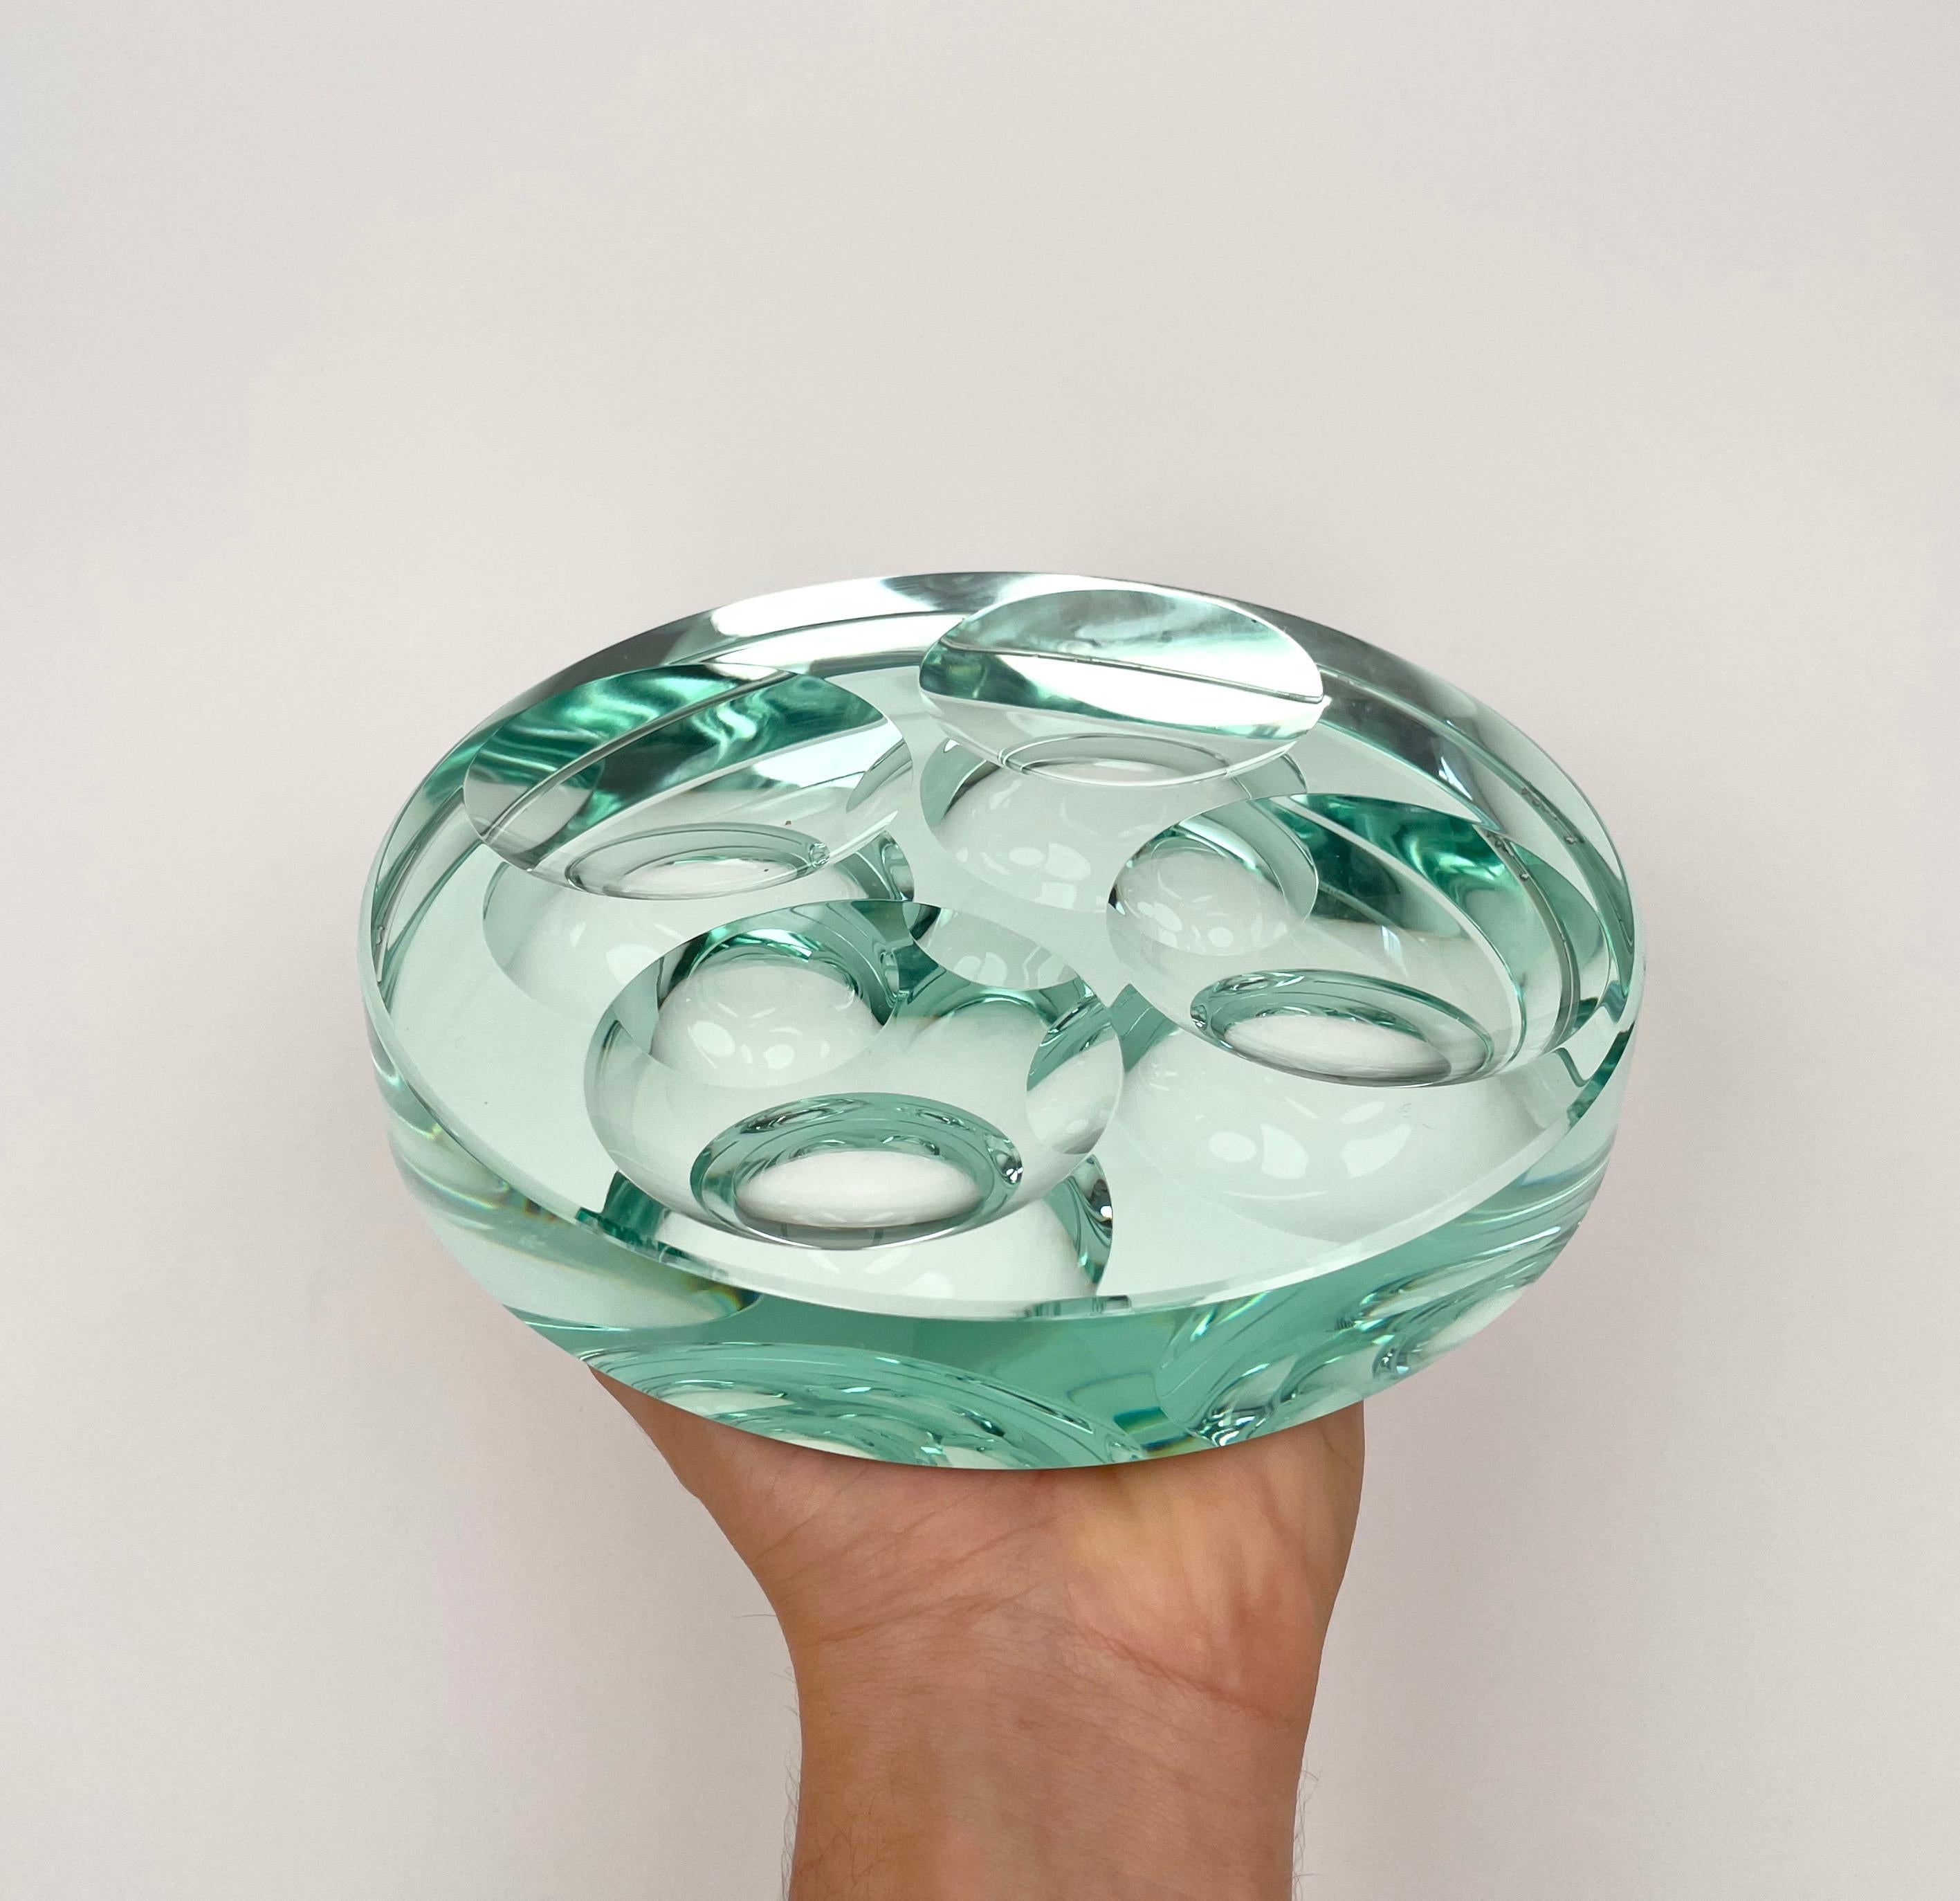 Round Bowl or Ashtray in Green Glass Mirrored by Fontana Arte, Italy 1960s For Sale 1